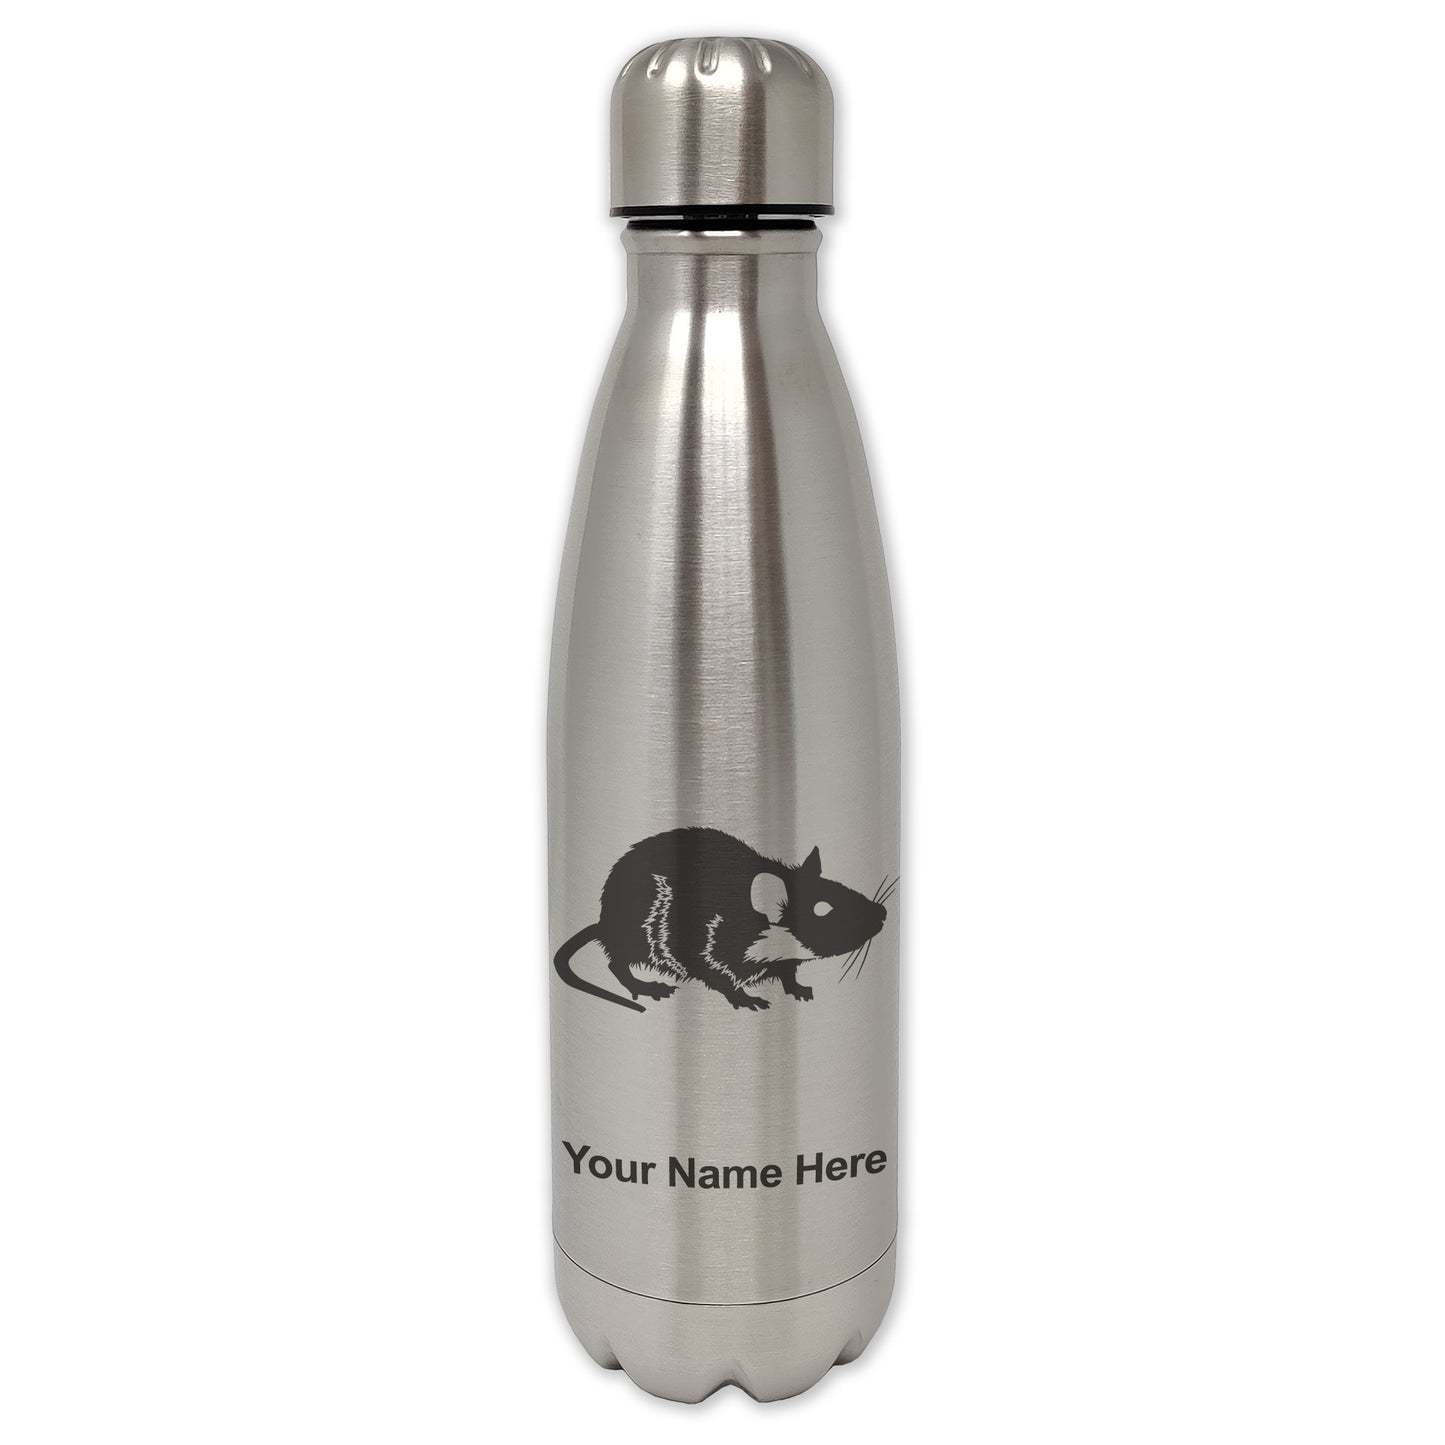 LaserGram Single Wall Water Bottle, Rat, Personalized Engraving Included